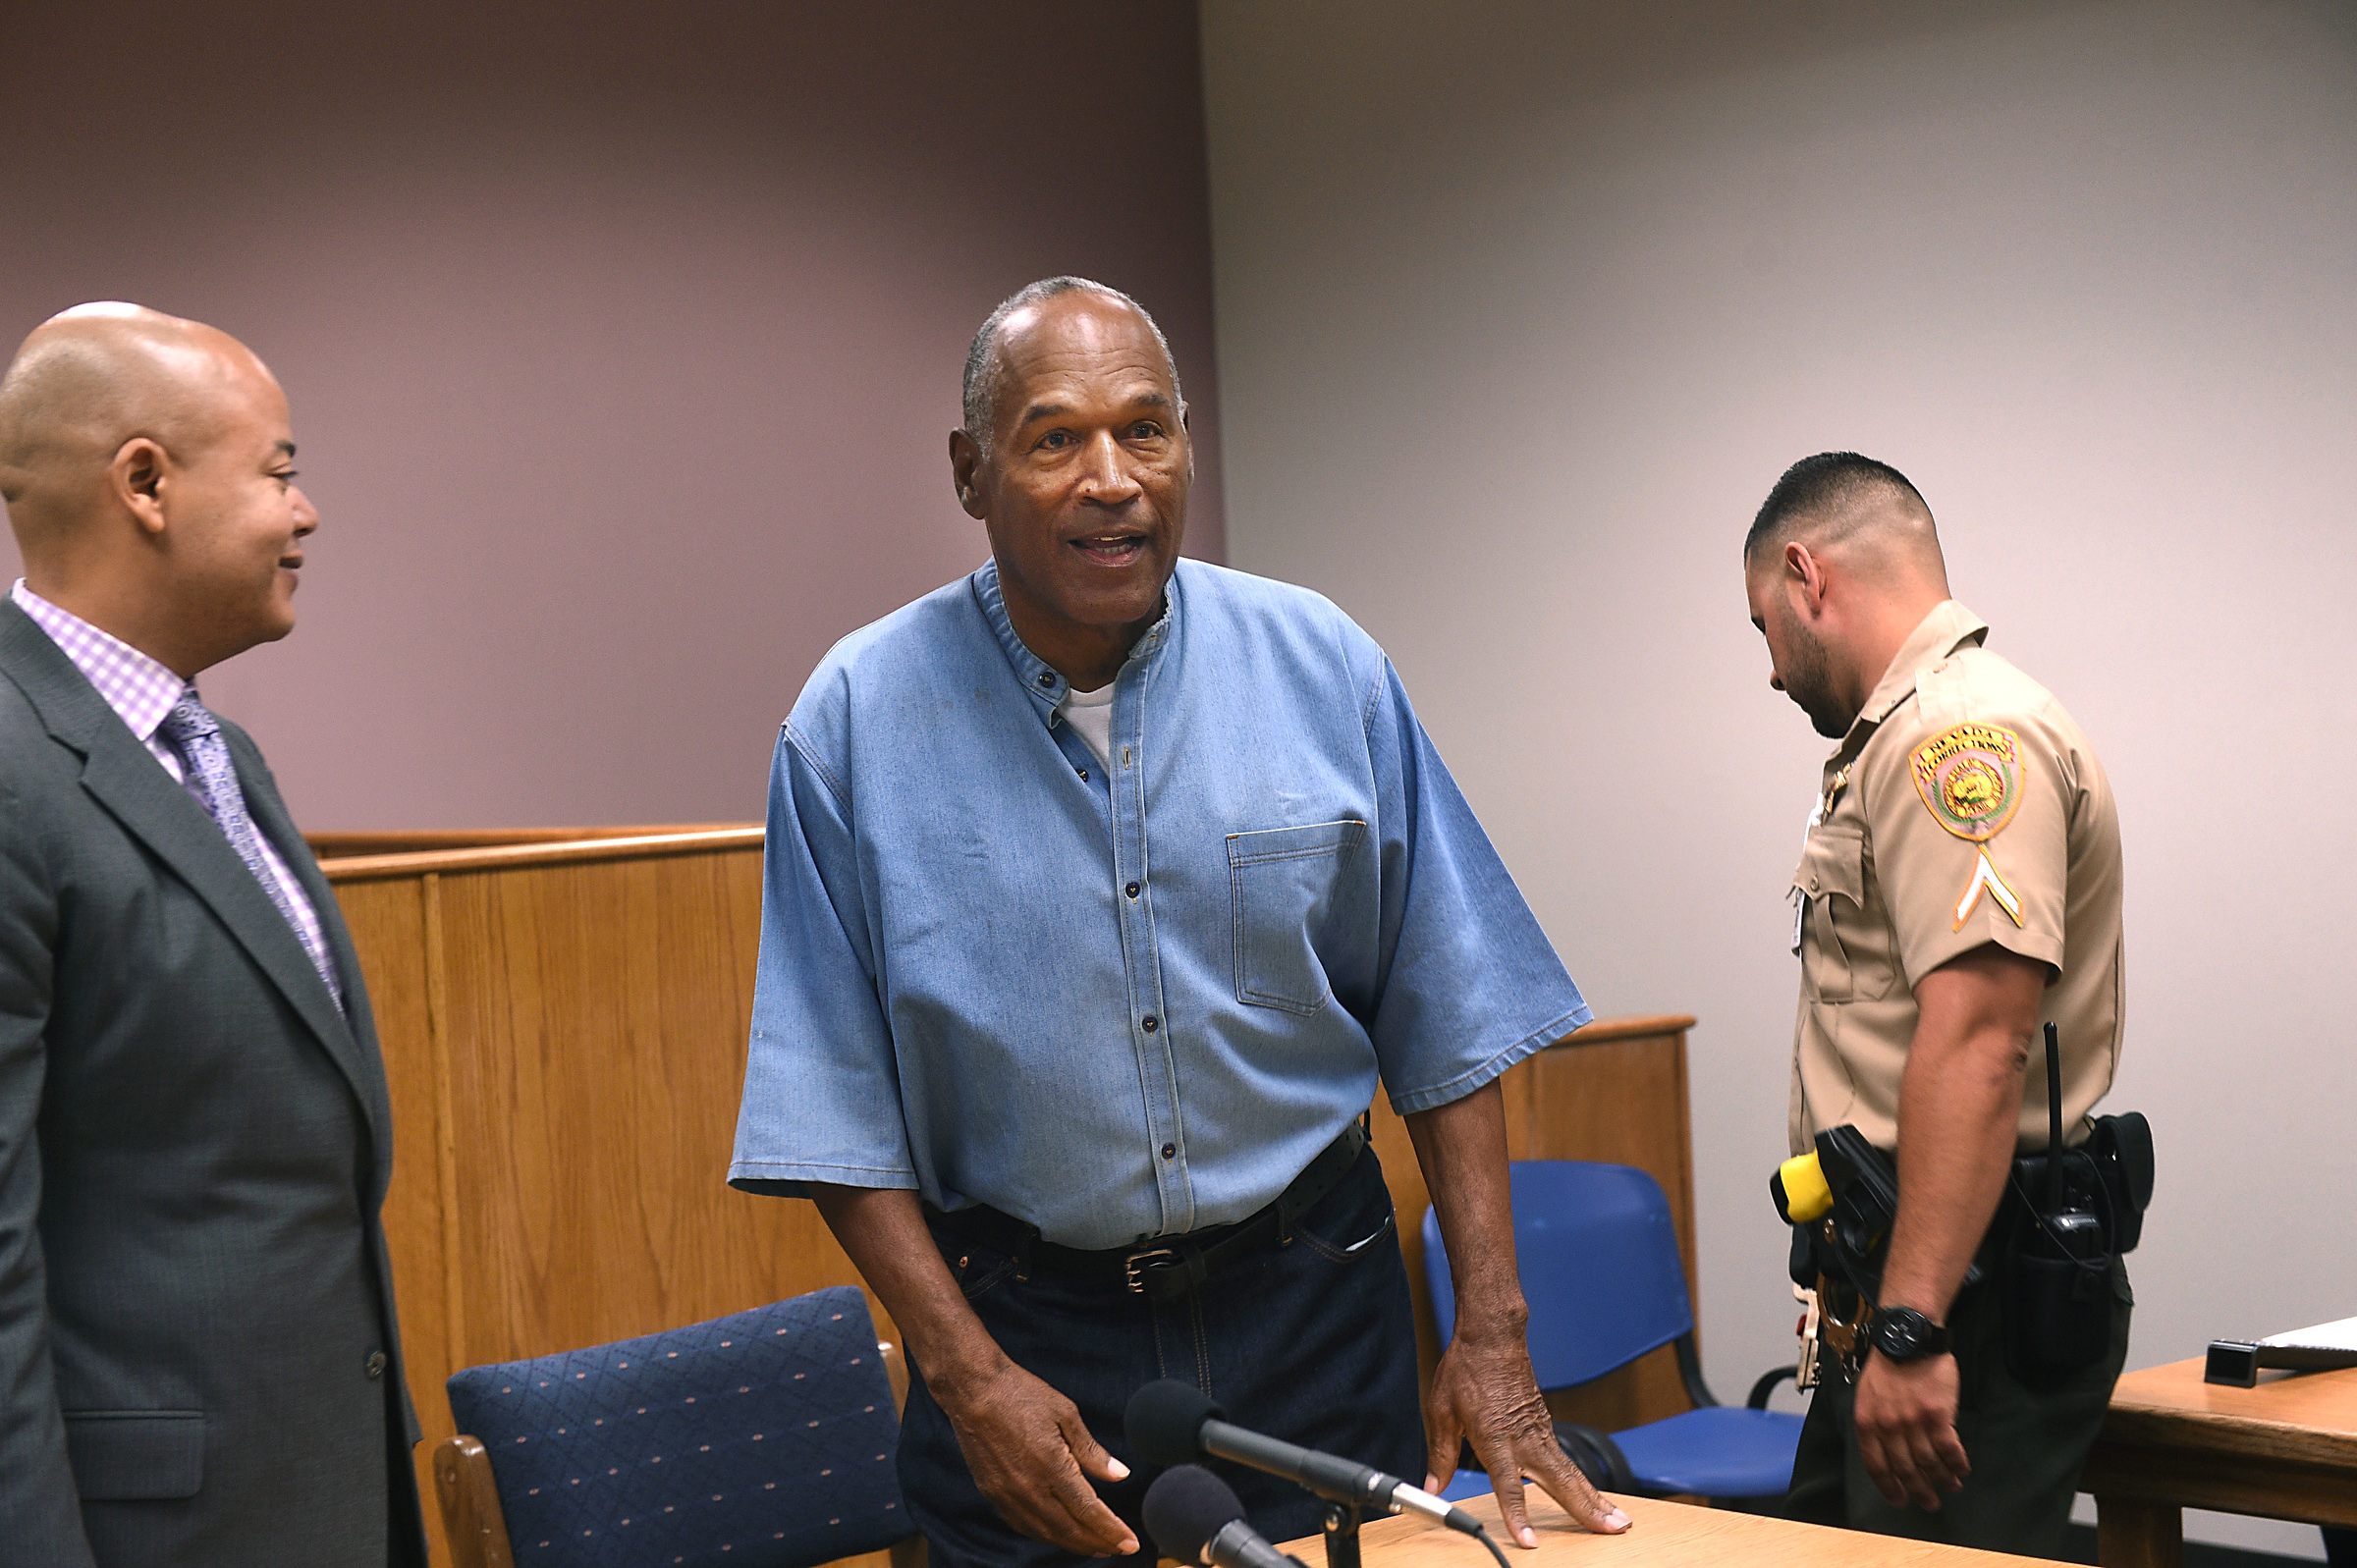 O. J. Simpson at his parole hearing in 2017. | Source: Getty Images